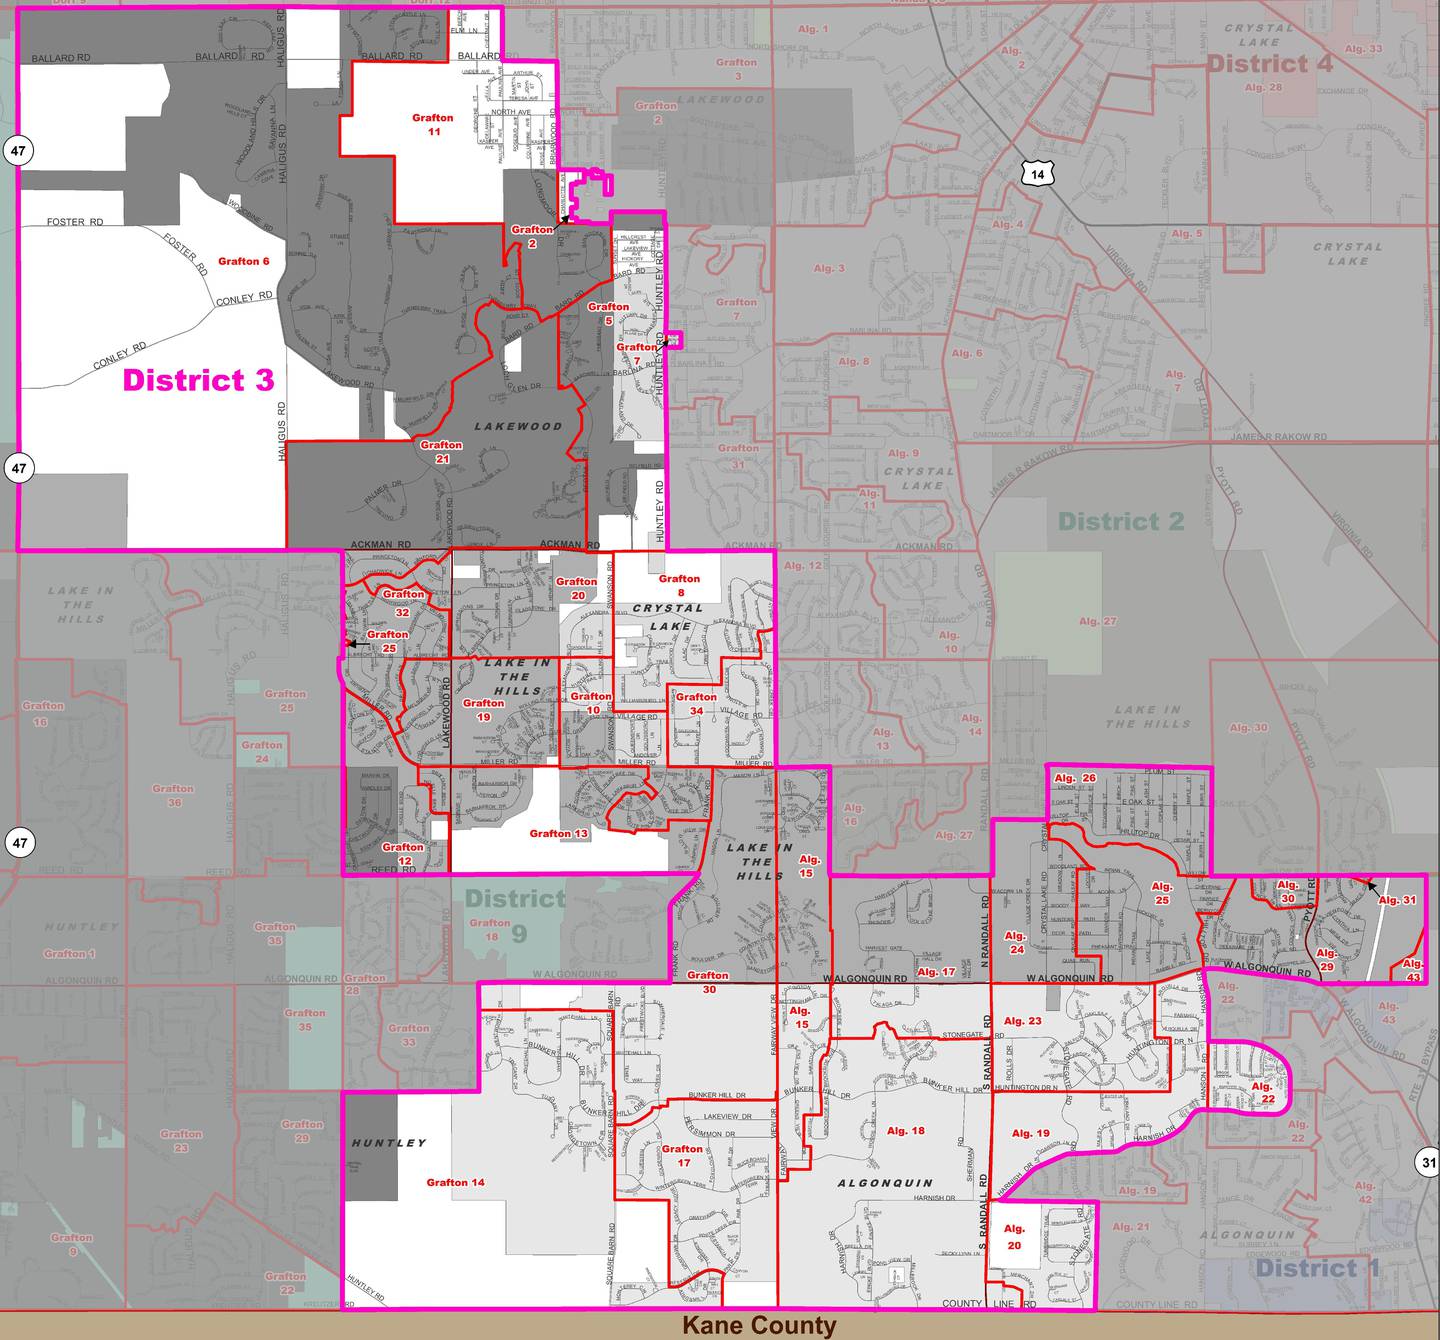 The newly redrawn McHenry County Board District 3 includes parts of Algonquin, Crystal Lake, Lakewood and Lake in the Hills.